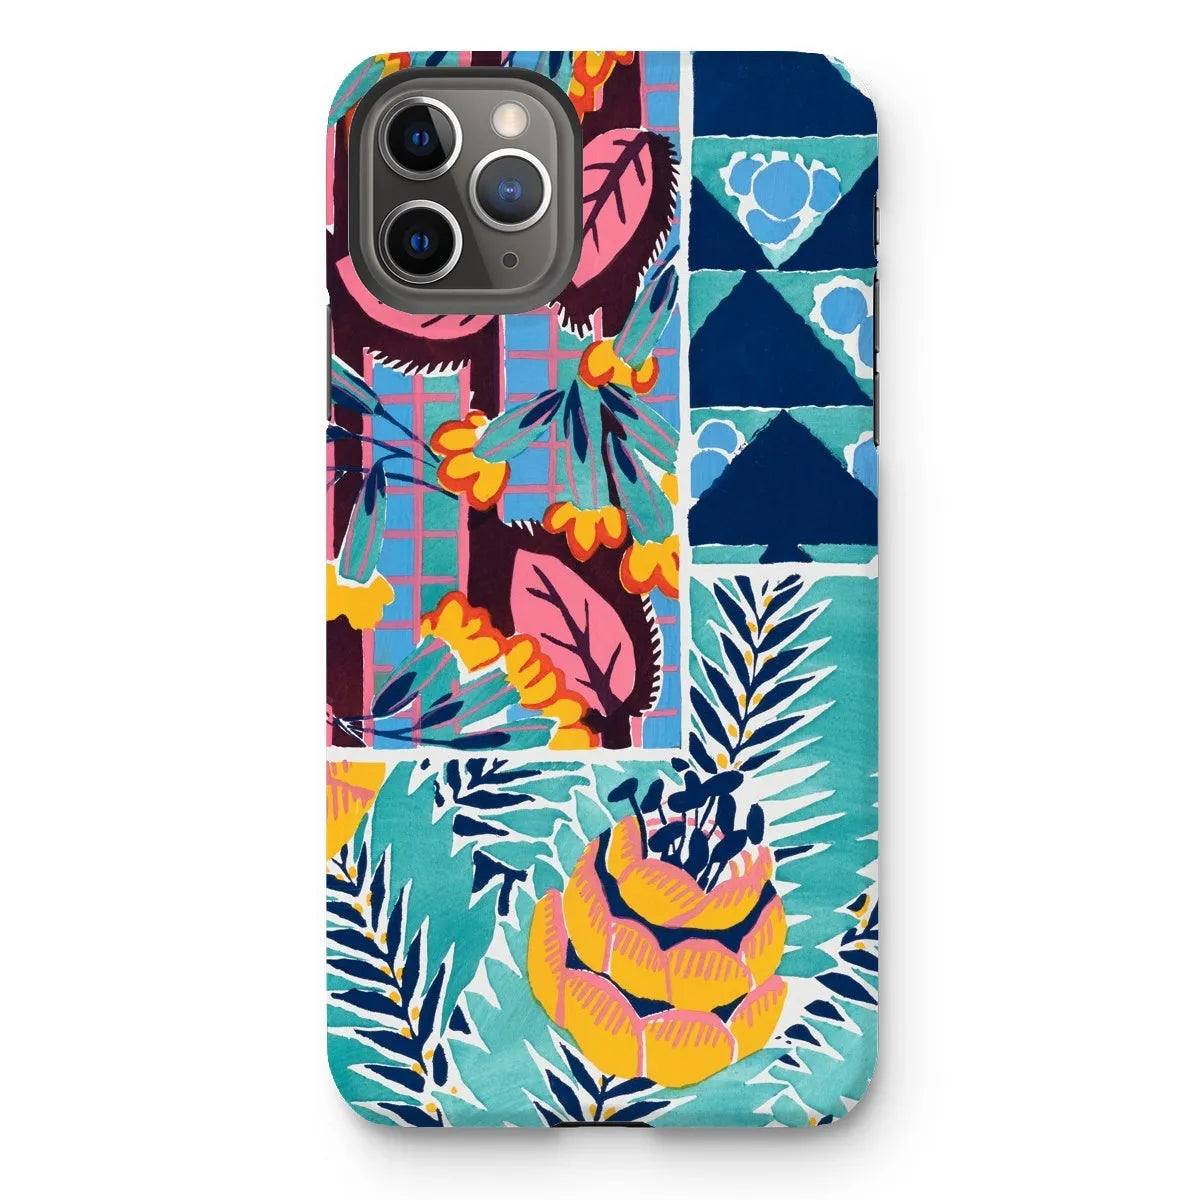 Fabric & Rugs - Pochoir Patterns Phone Case - E. A. Séguy - Iphone 11 Pro Max / Matte - Mobile Phone Cases